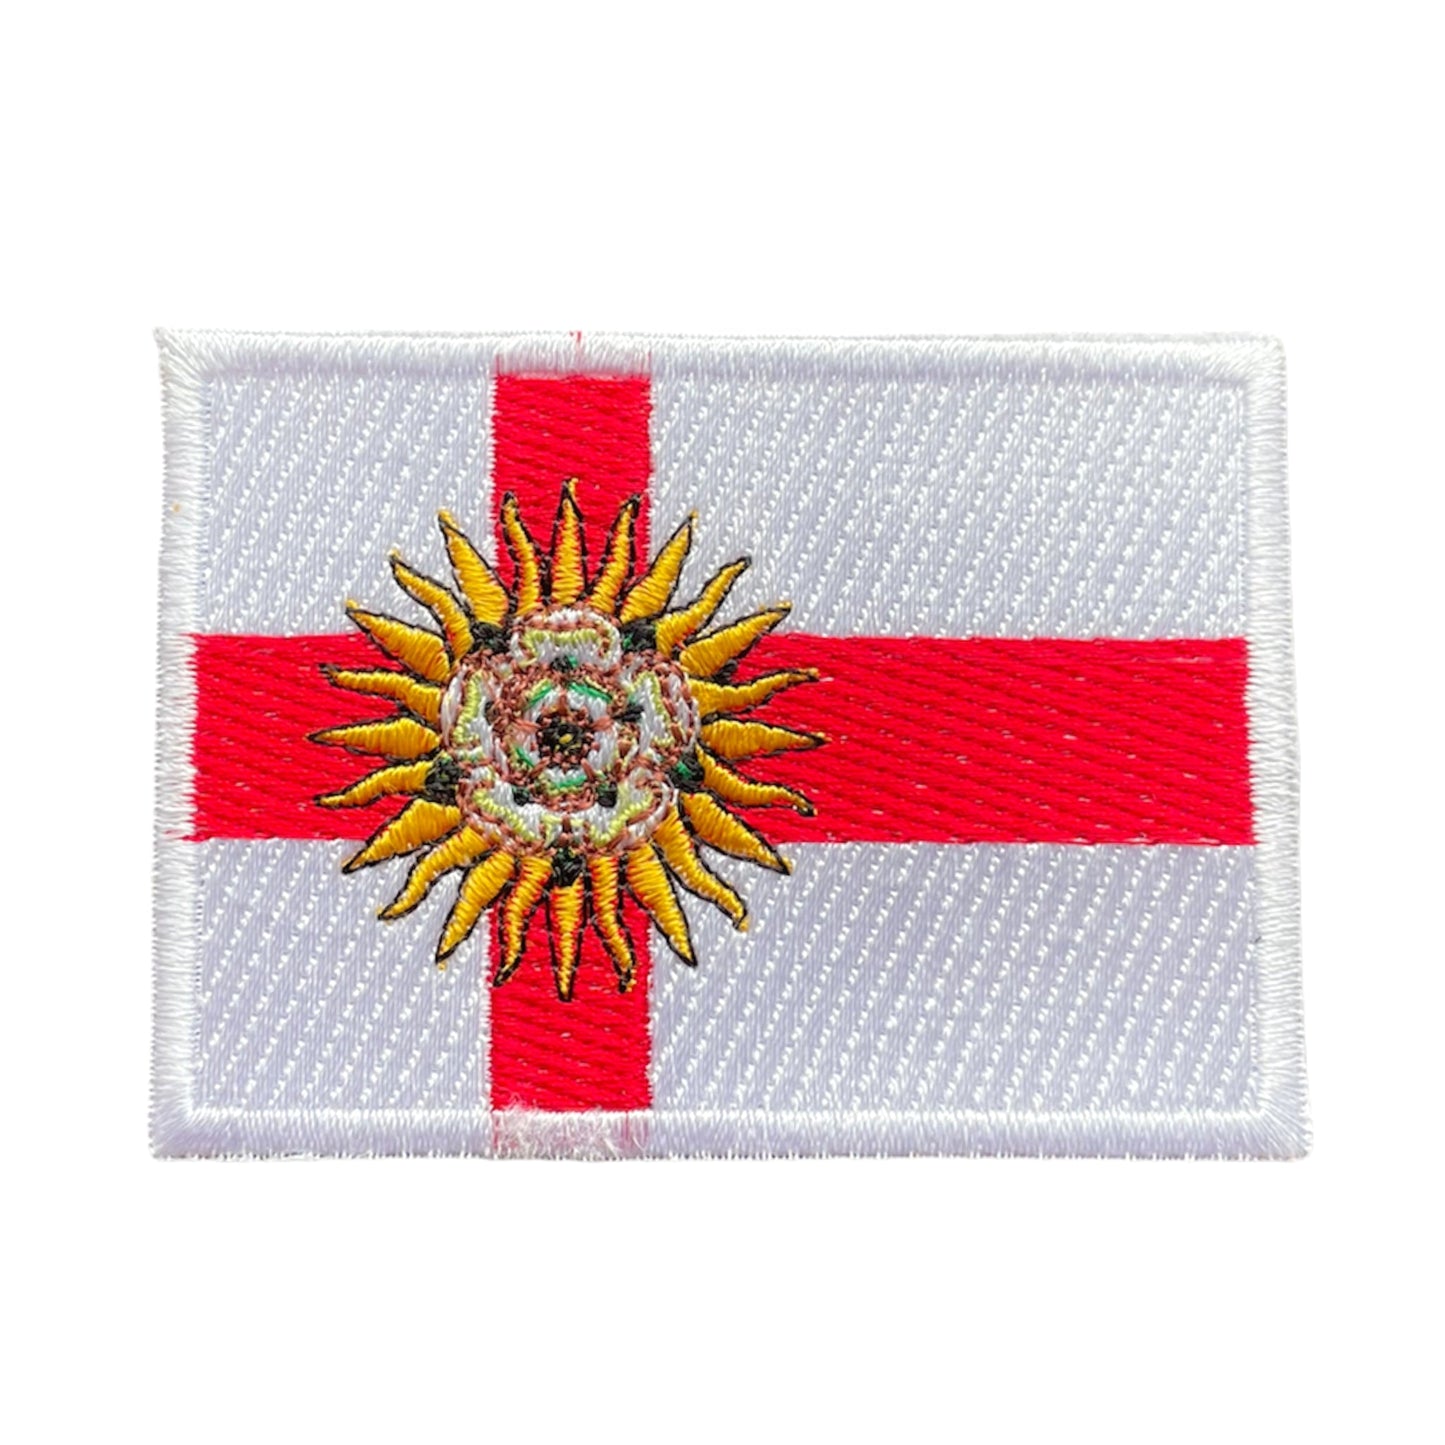 West Riding of Yorkshire Flag Patch - The Great Yorkshire Shop